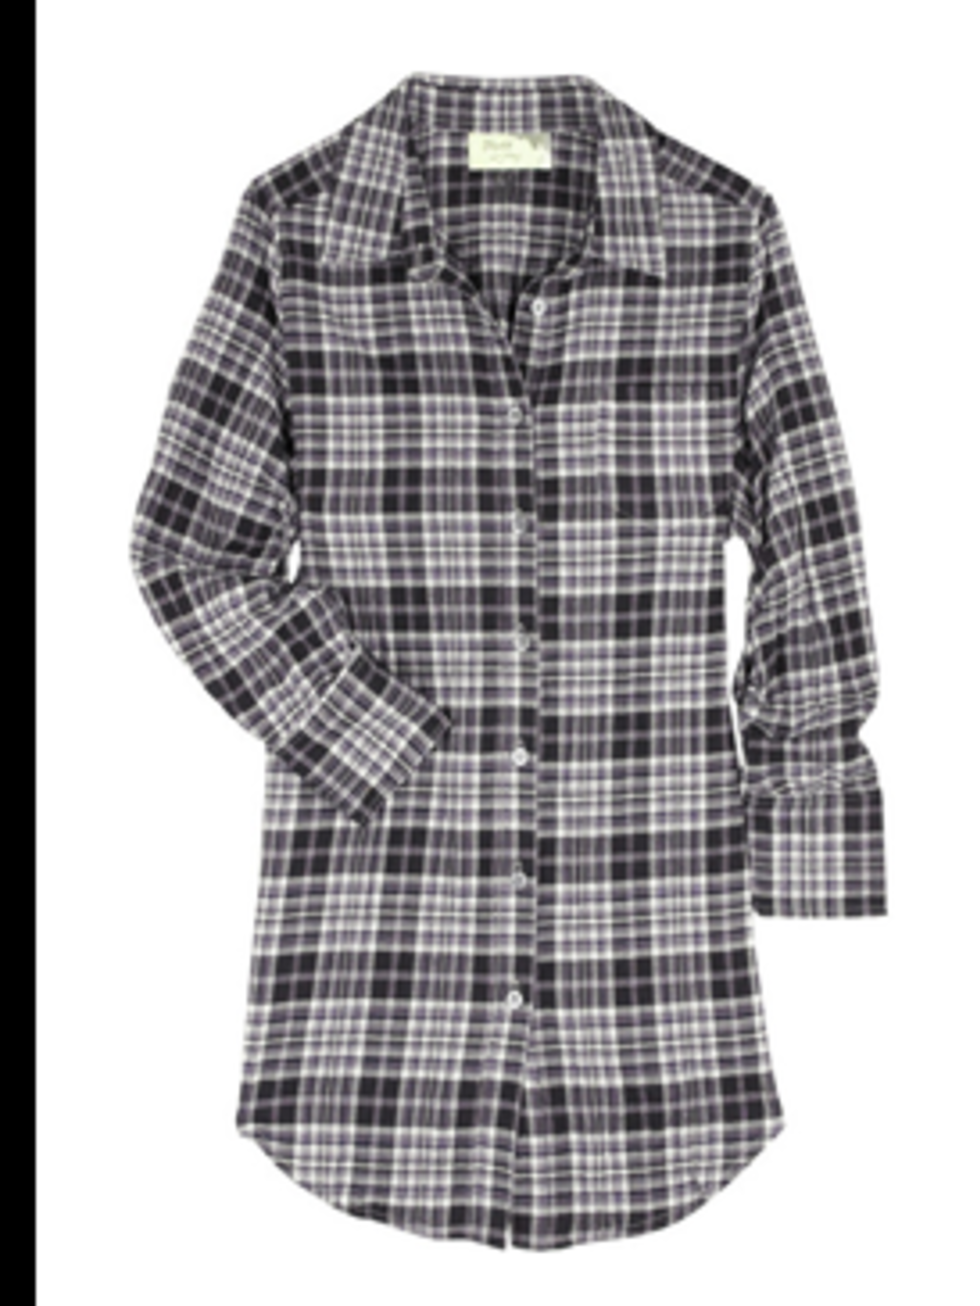 <p> Shirt, £165 by Elizabeth and James at <a href="http://www.net-a-porter.com/product/36457">Net-a-Porter</a></p>